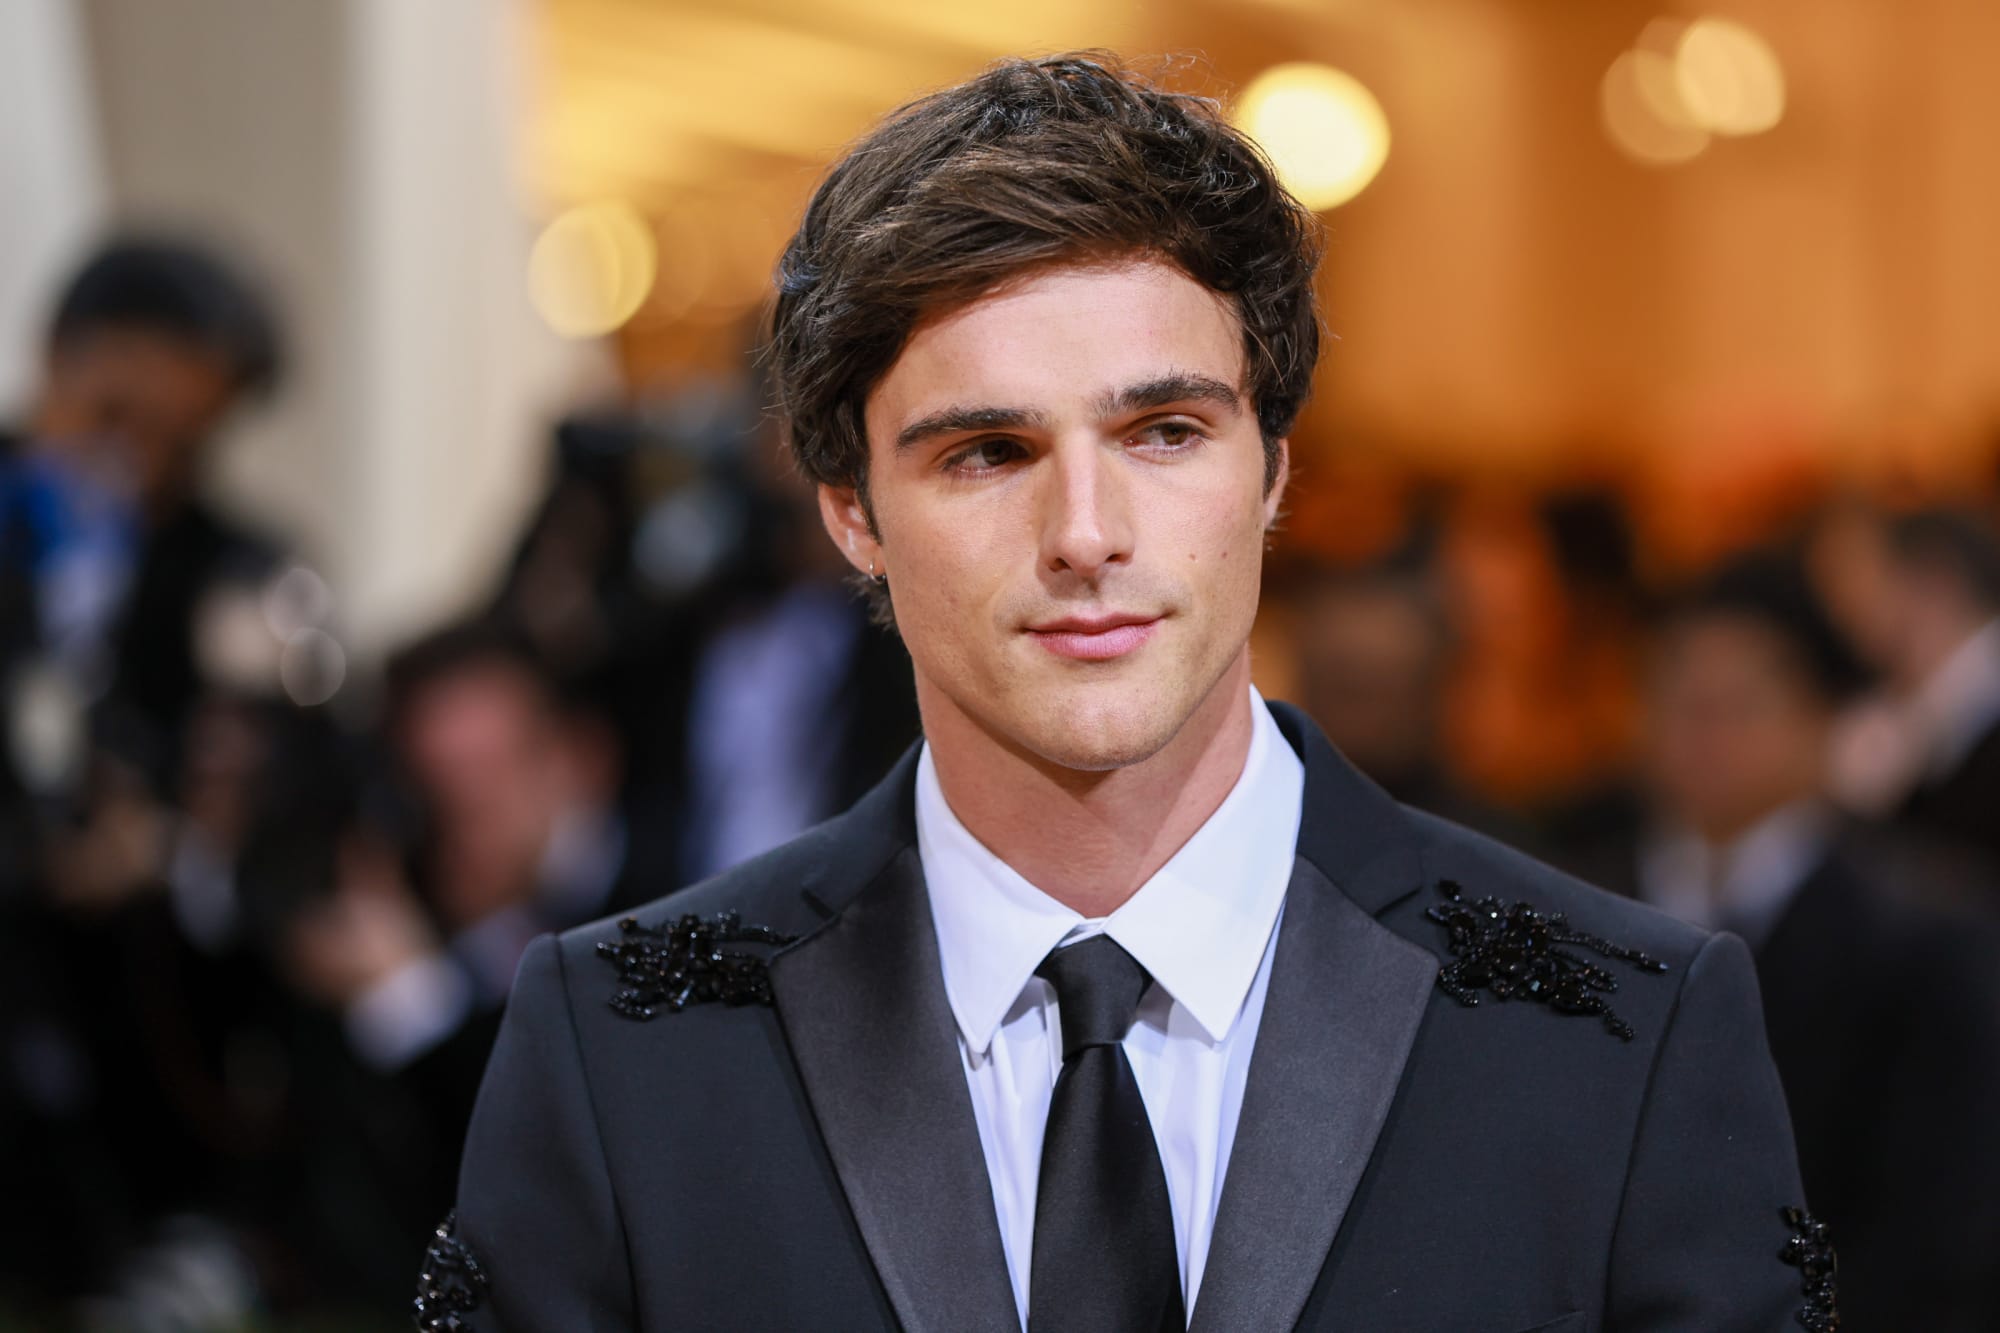 The Brave and the Bold: Jacob Elordi suits up as Batman in stunning image